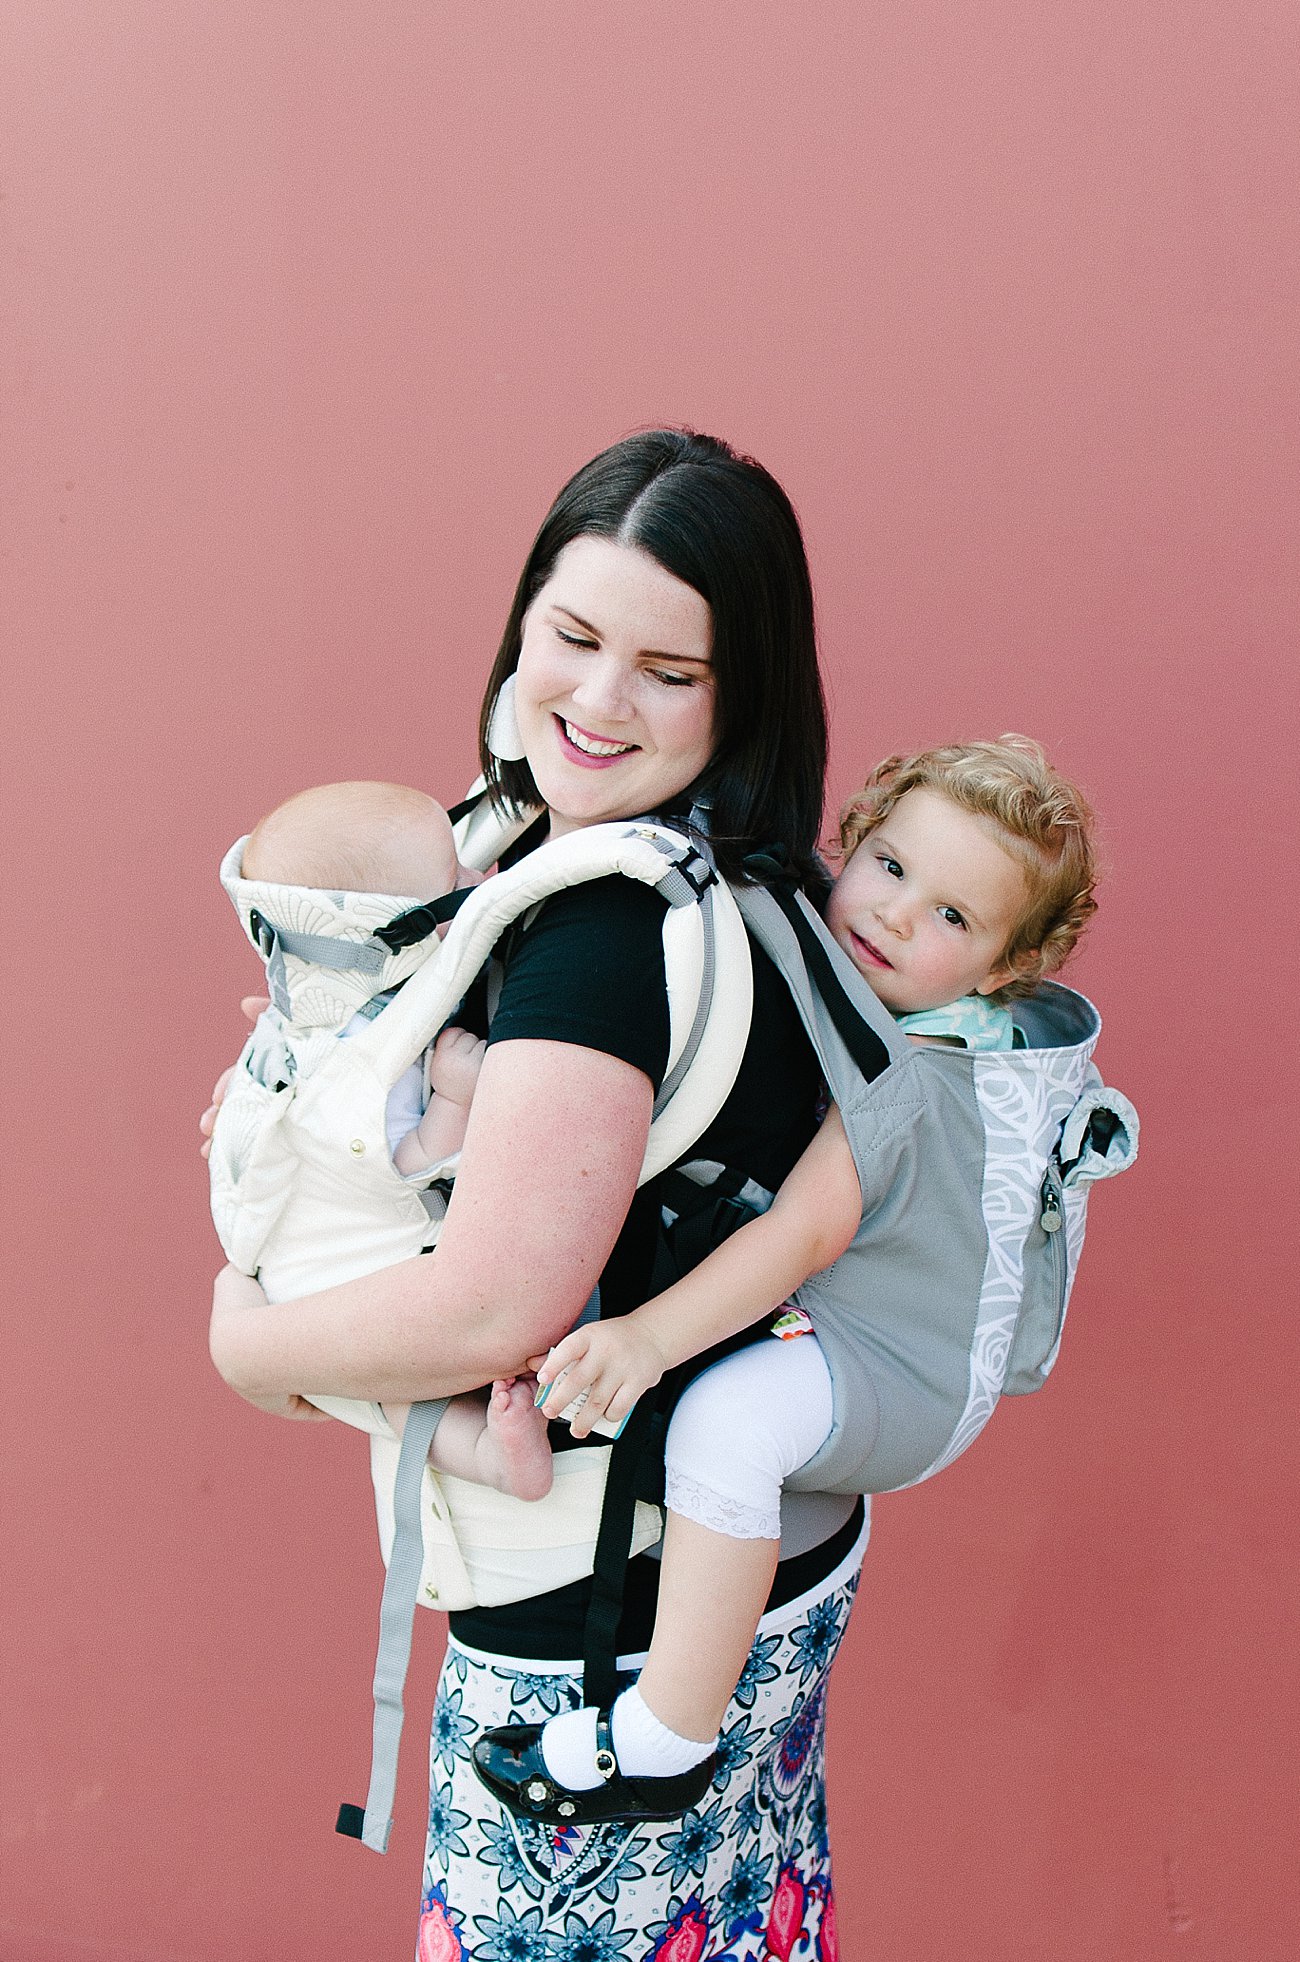 with Lillebaby Complete & CarryOn Baby Carriers #babywearing #tandemwearing #toddlerwearing (2)